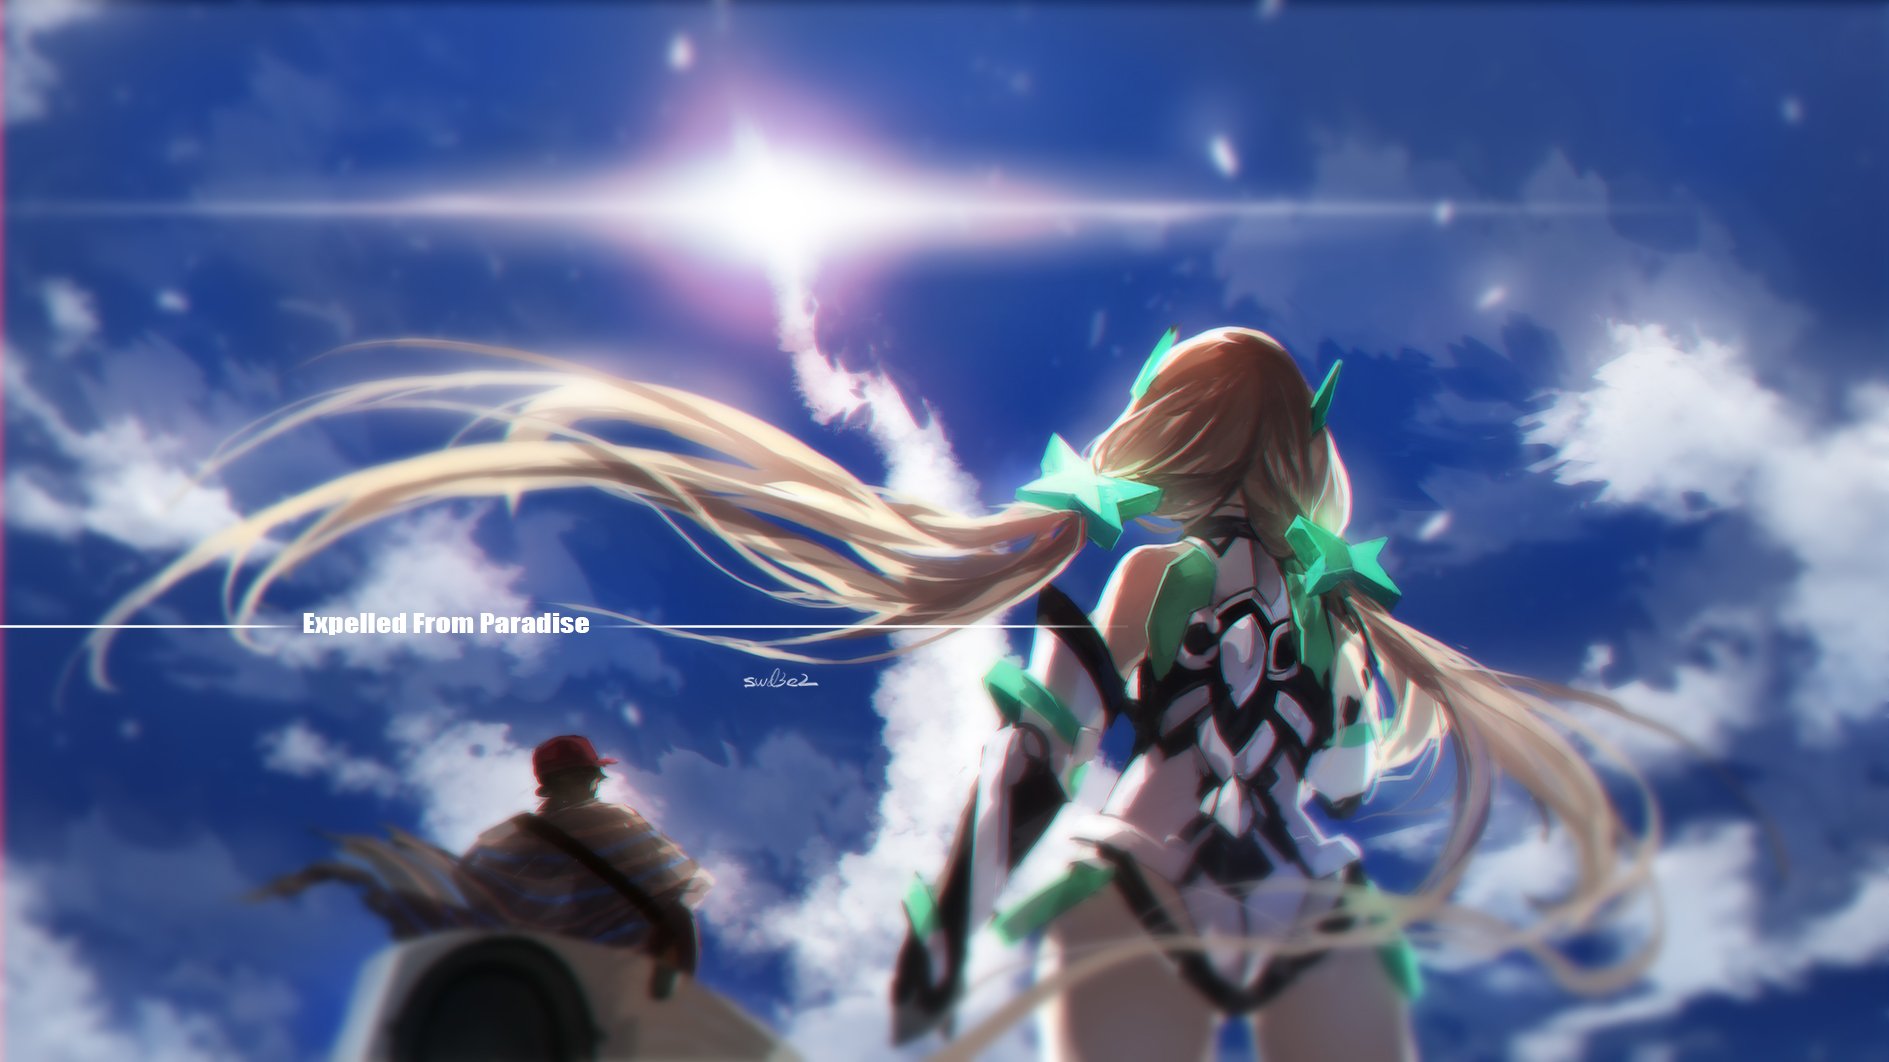 angela, Balzac, Blonde, Hair, Bodysuit, Clouds, Expelled, From, Paradise, Long, Hair, Sky, Swd3e2, Twintails Wallpaper